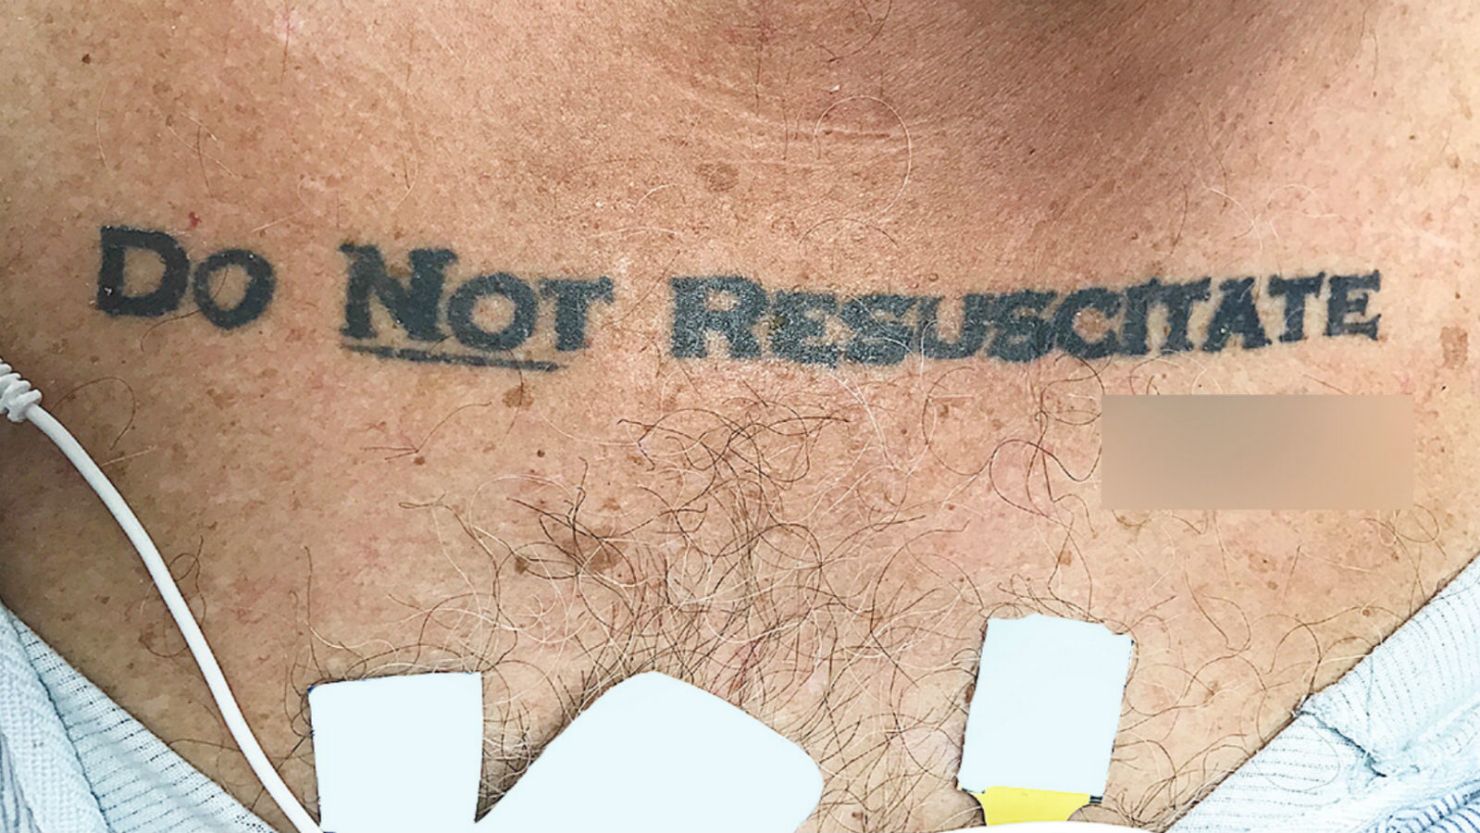 A man admitted to a Florida hospital had an unusual do not resuscitate order, a new study shows.